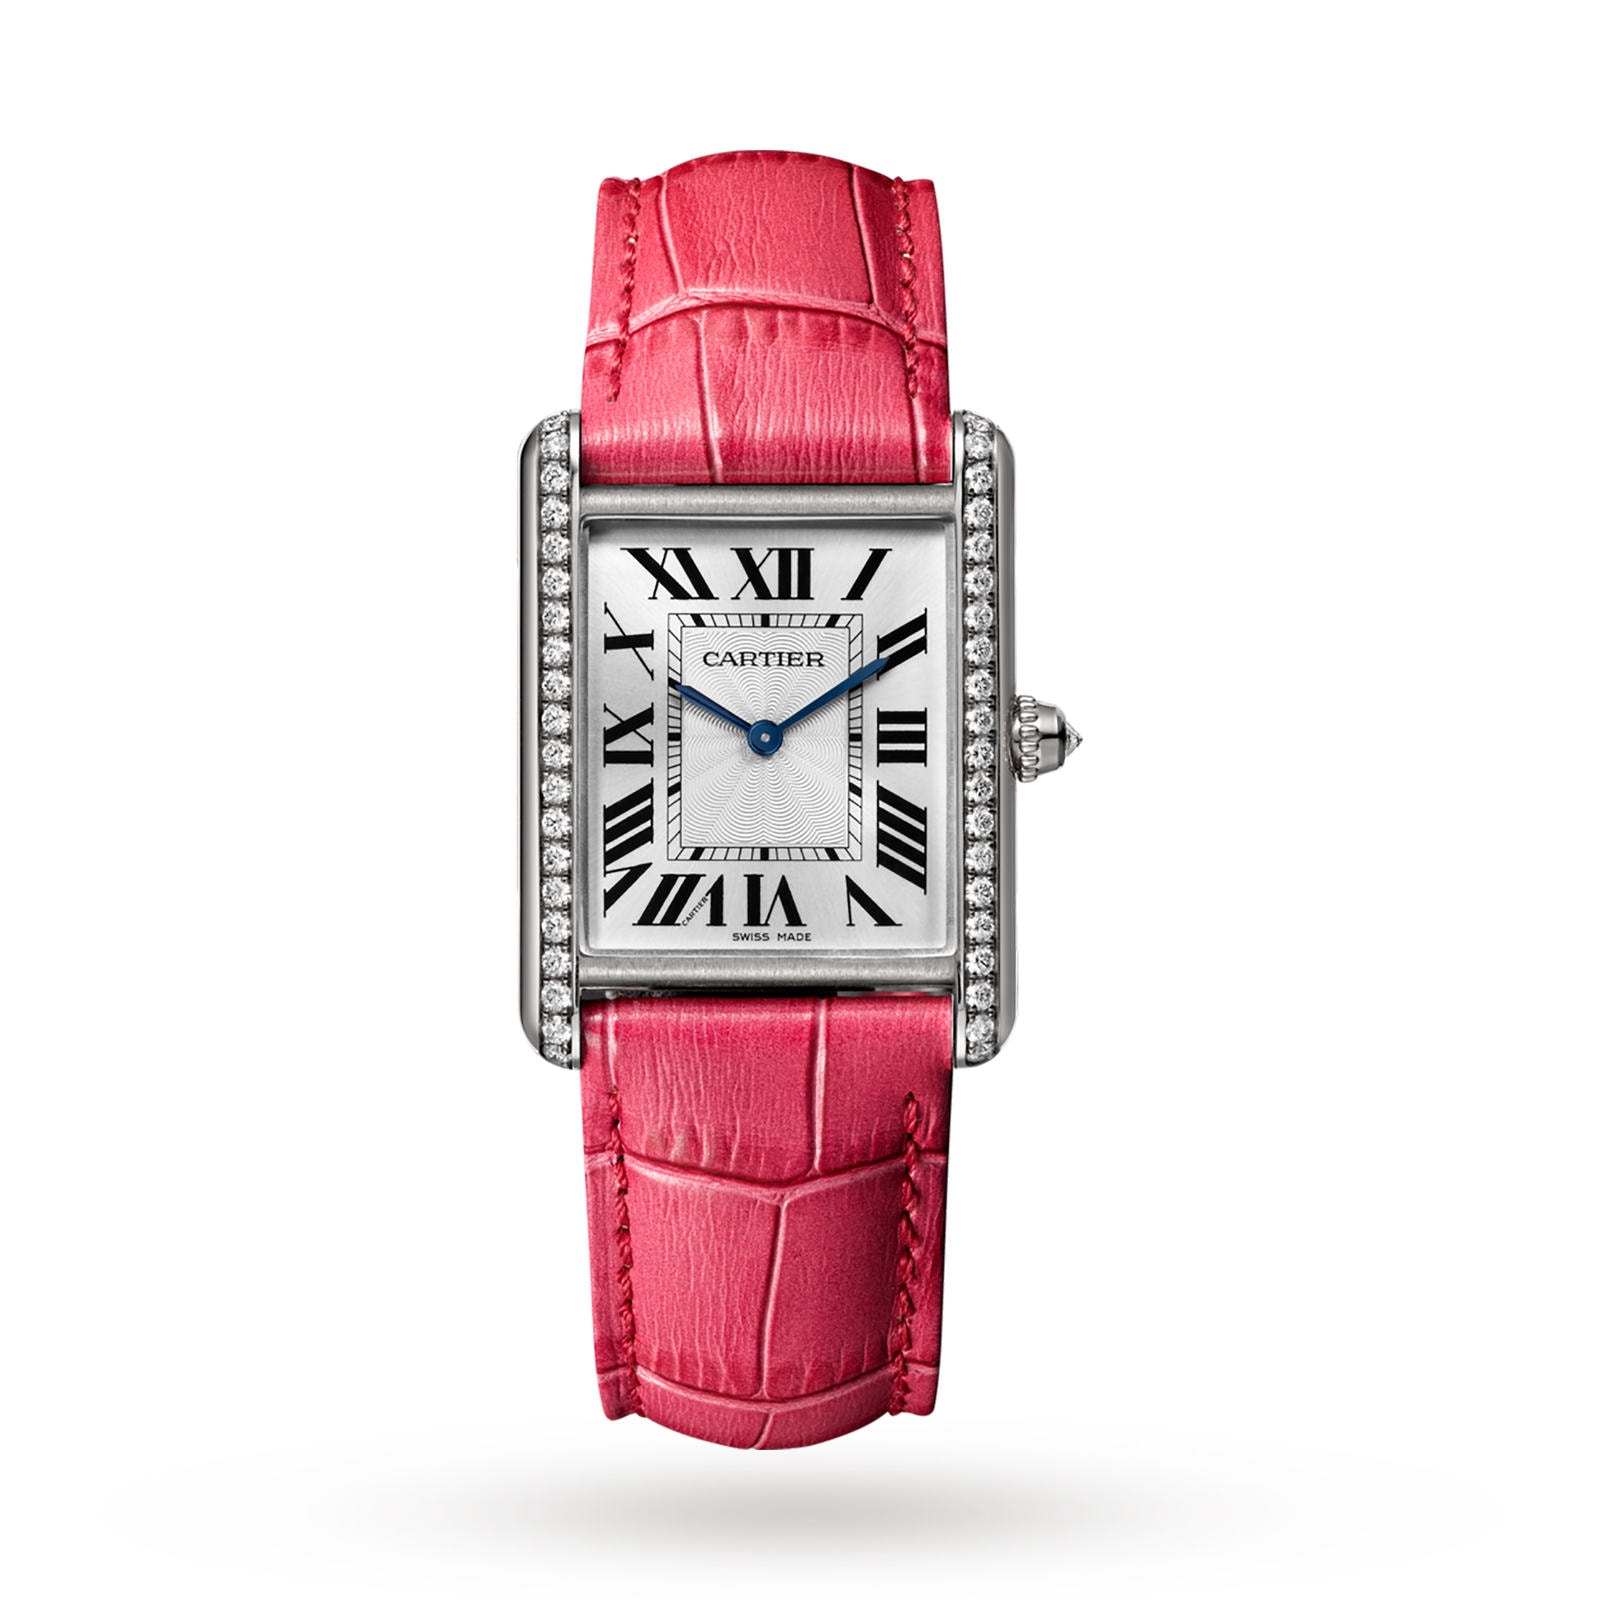 cartier tank watch stopped working